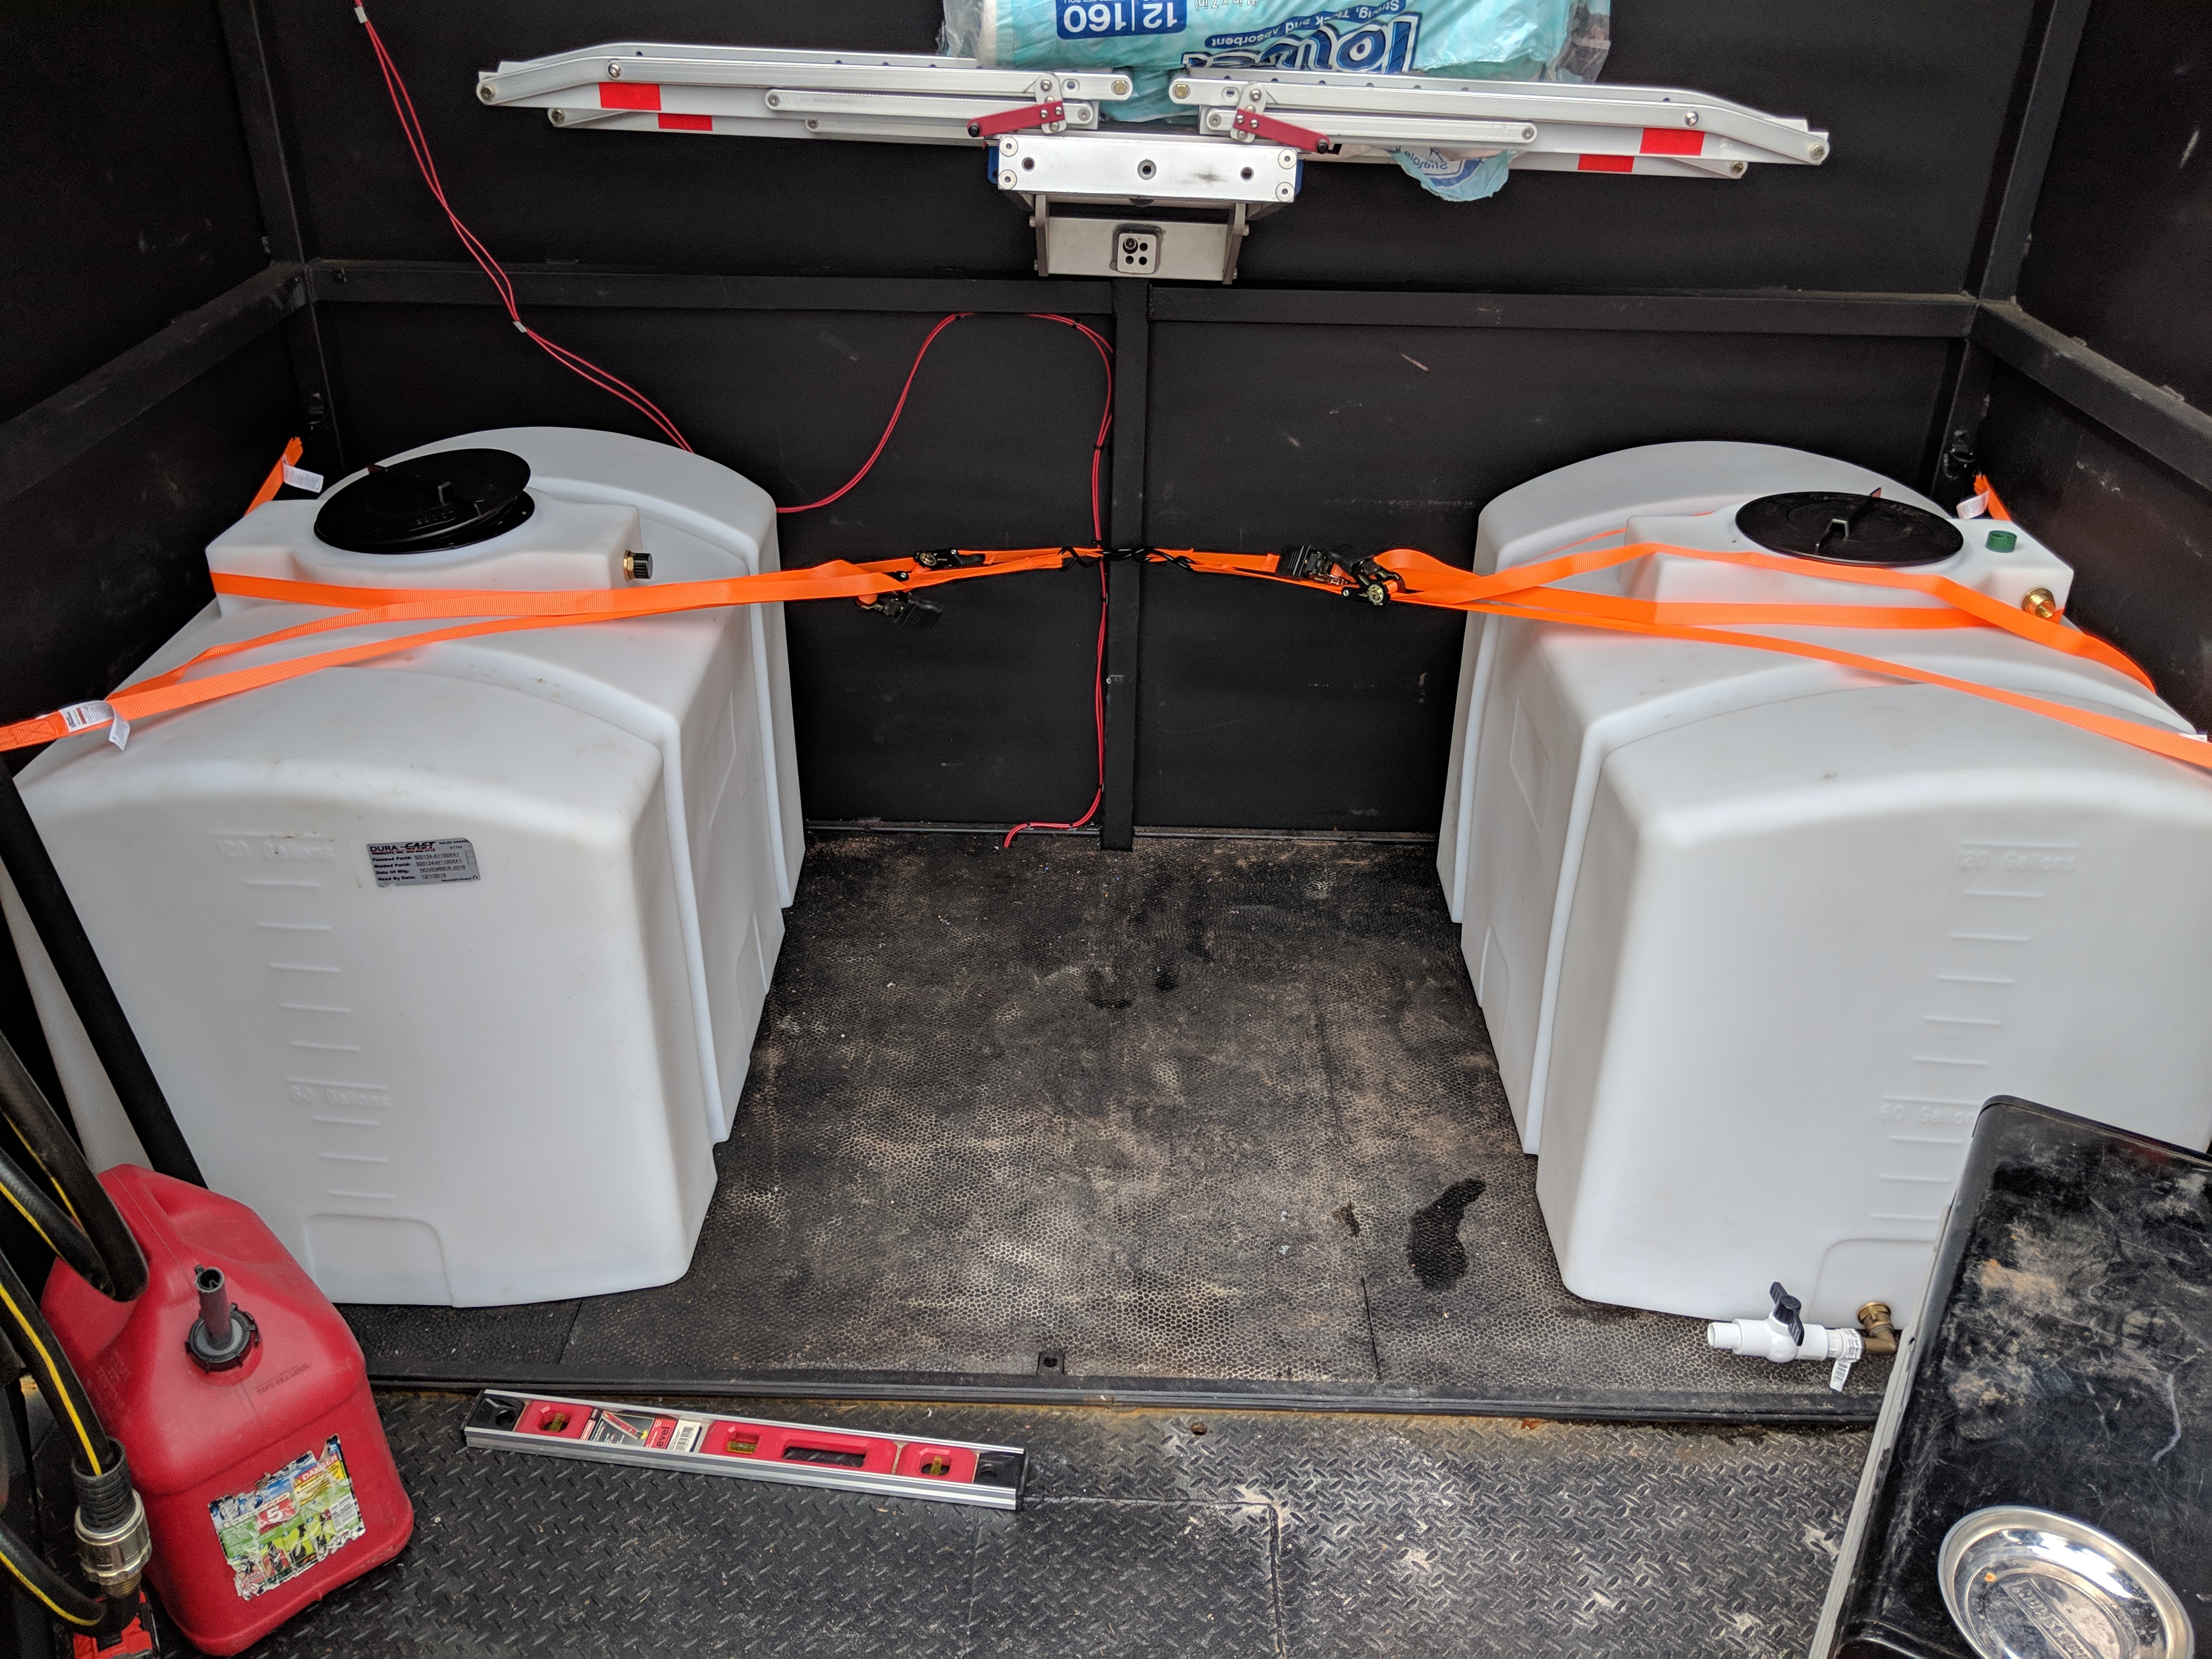 Addition of two 125 Gallon tanks, one fresh, one waste.